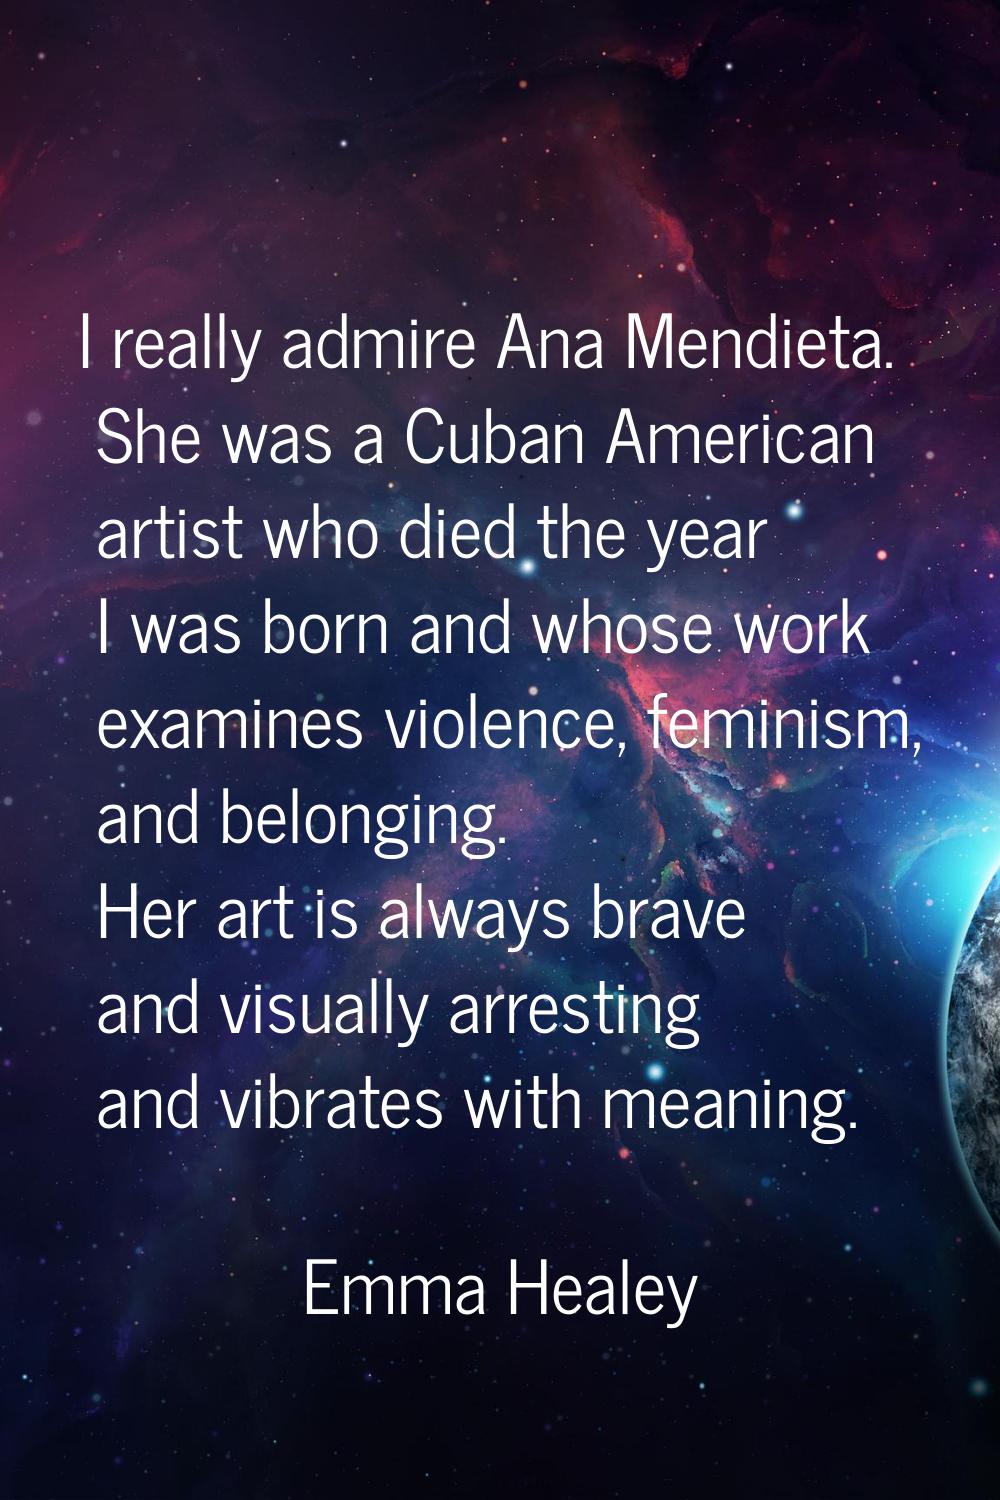 I really admire Ana Mendieta. She was a Cuban American artist who died the year I was born and whos